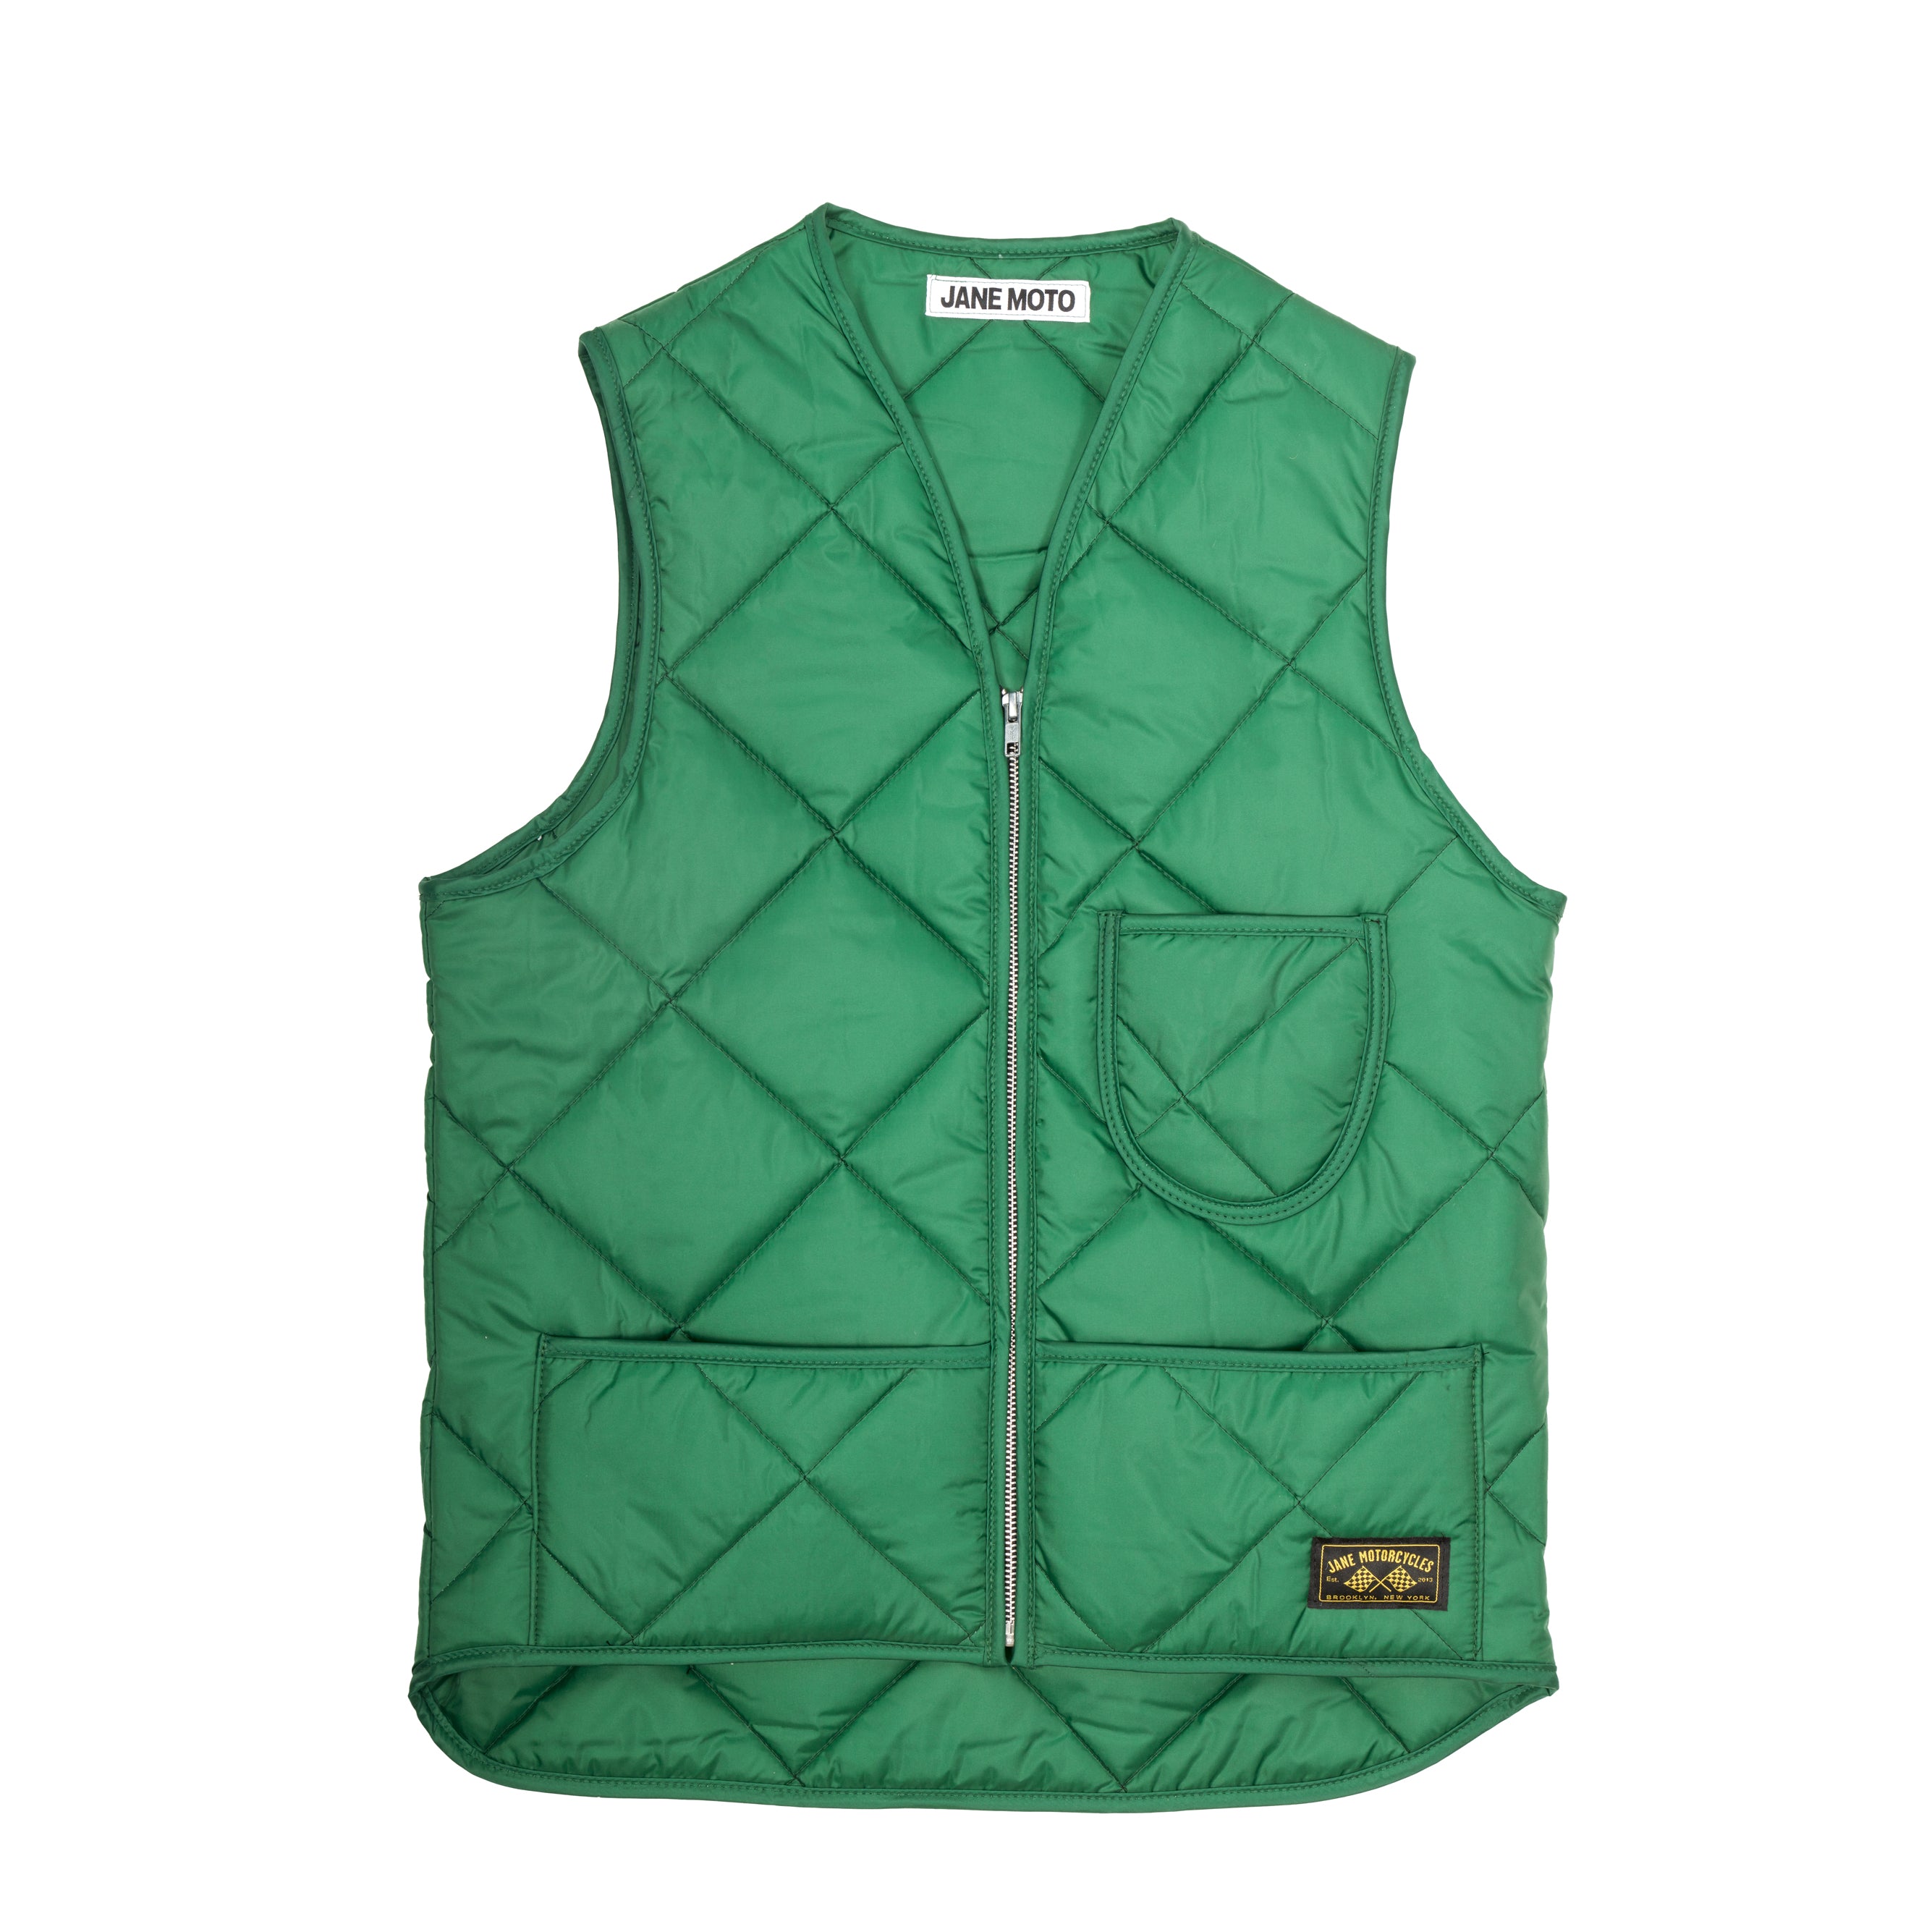 THE UNION QUILTED VEST - Green